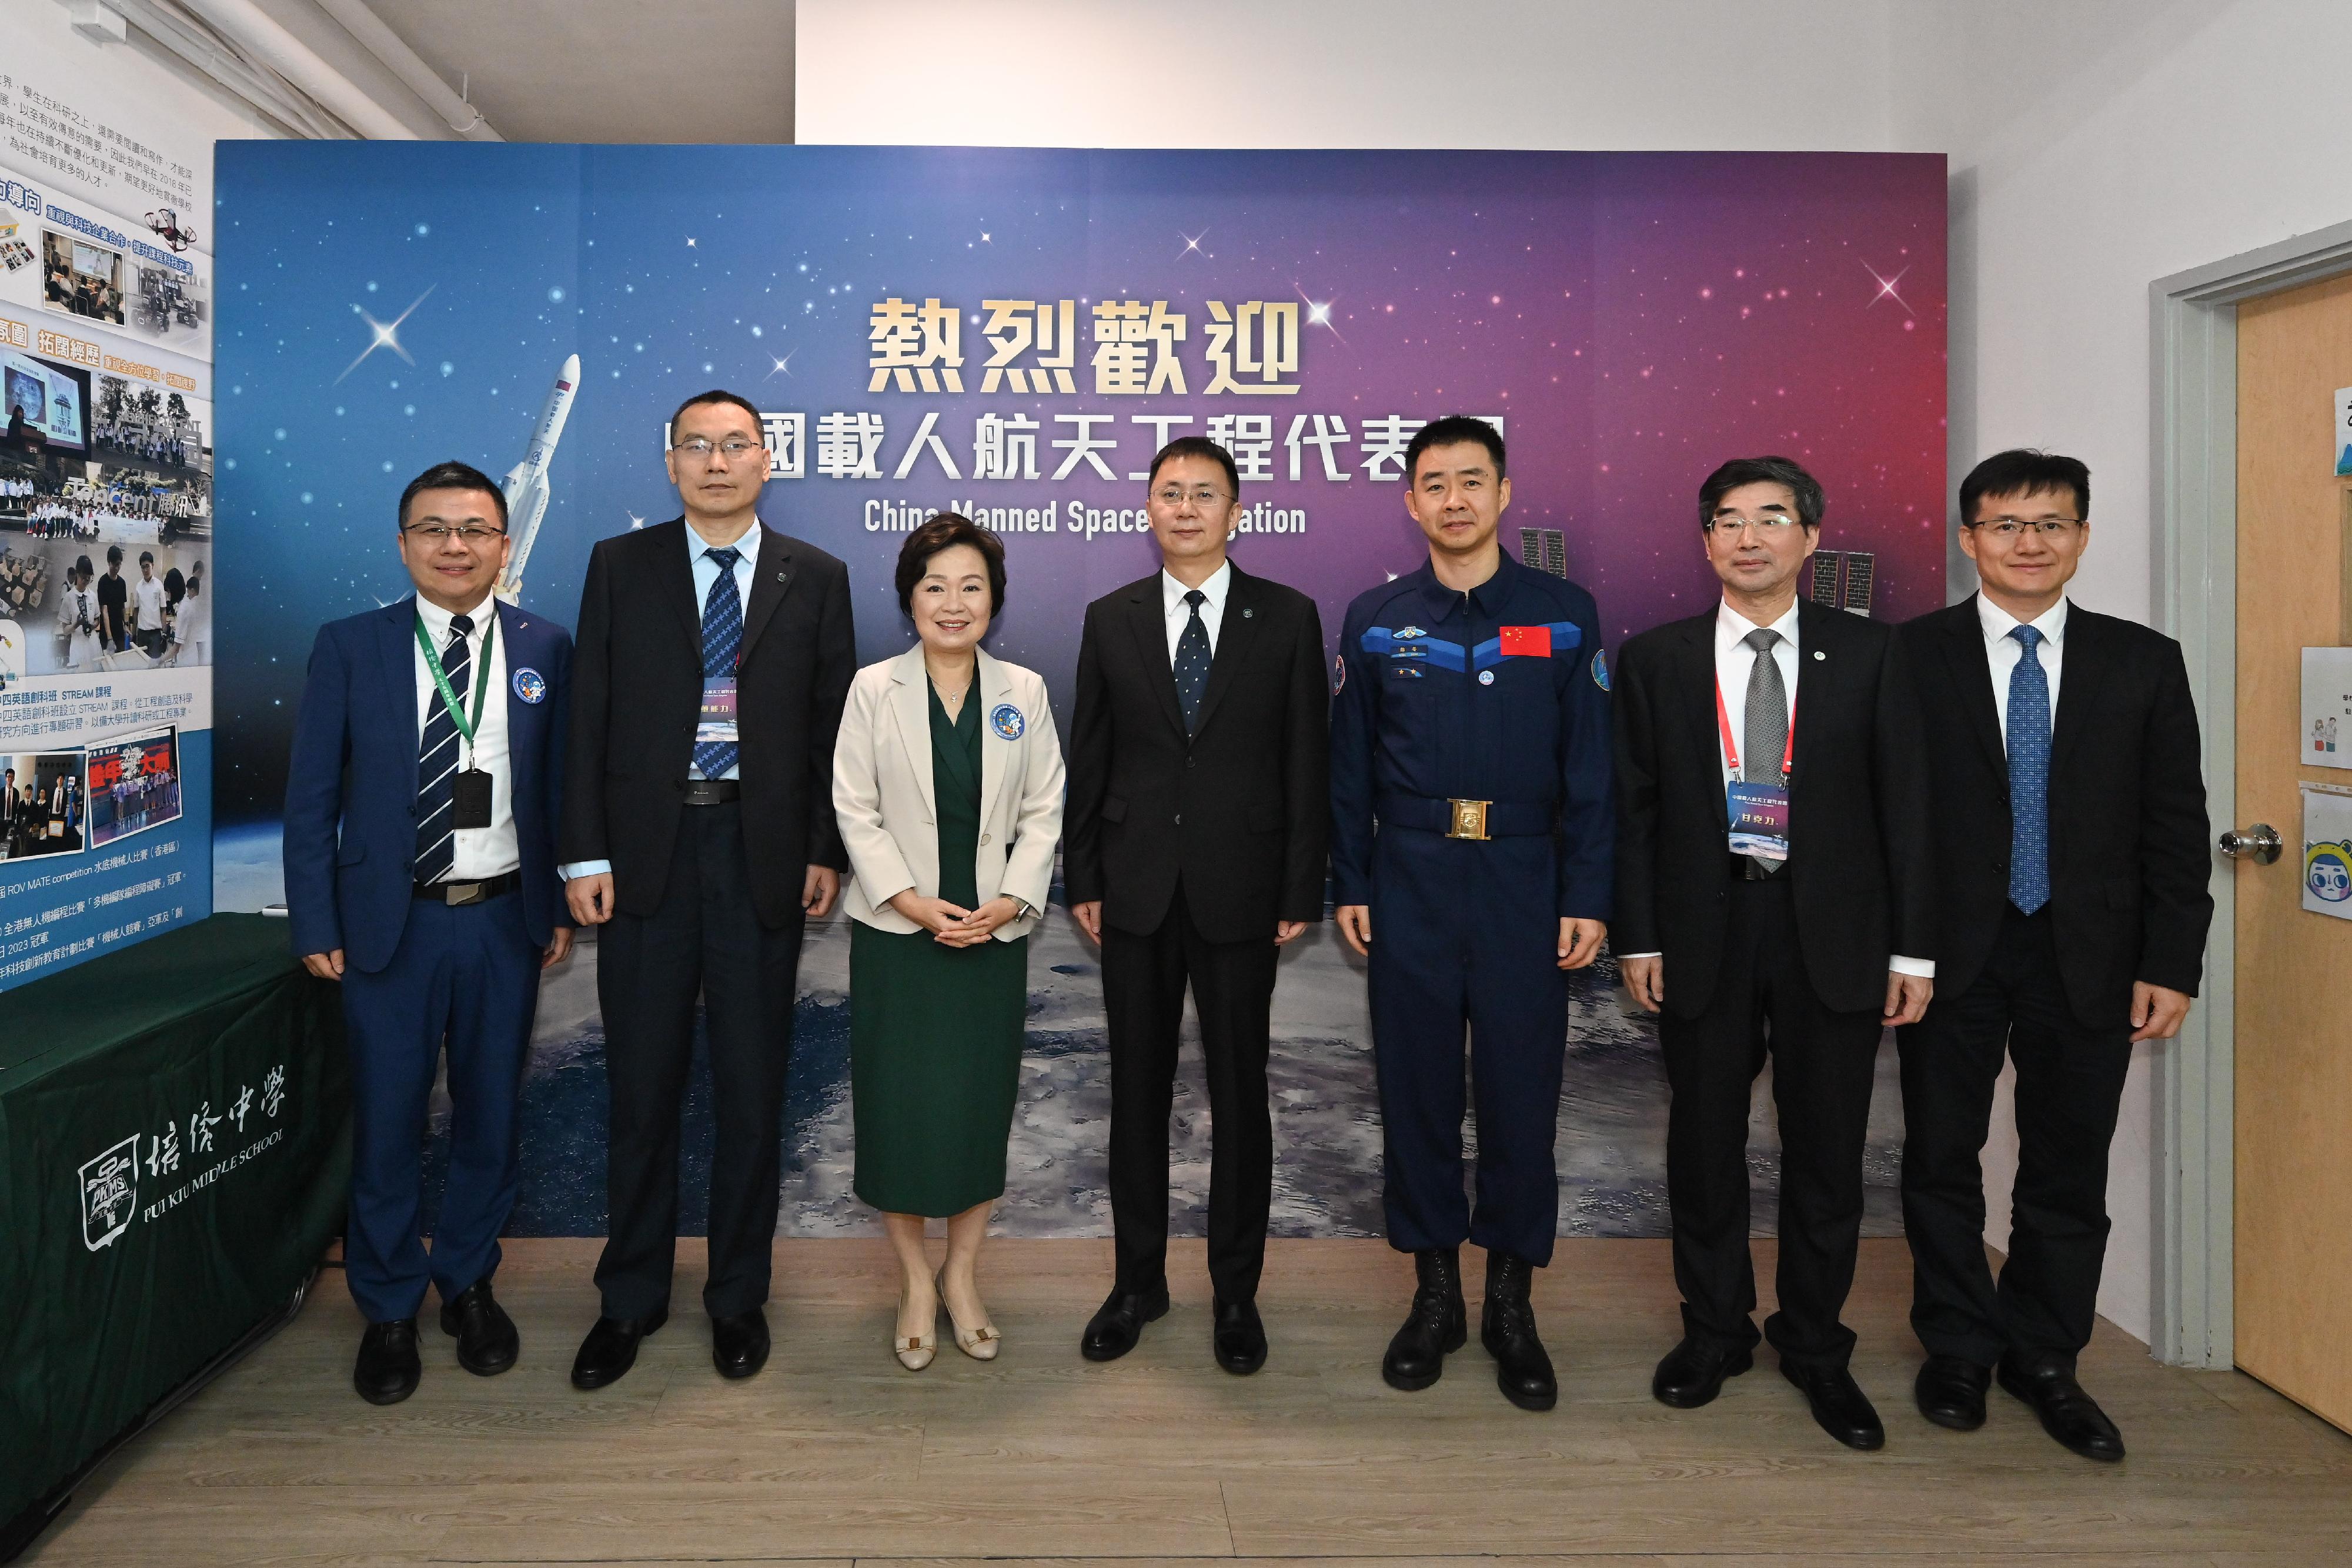 The China Manned Space delegation continued their visit in Hong Kong today (November 29). Photo shows (from third left) the Secretary for Education, Dr Choi Yuk-lin; the leader of the delegation and Deputy Director General of the China Manned Space Agency, Mr Lin Xiqiang; Shenzhou-14 mission commander Mr Chen Dong, together with the delegation members, attending a dialogue session with students at Pui Kiu Middle School.